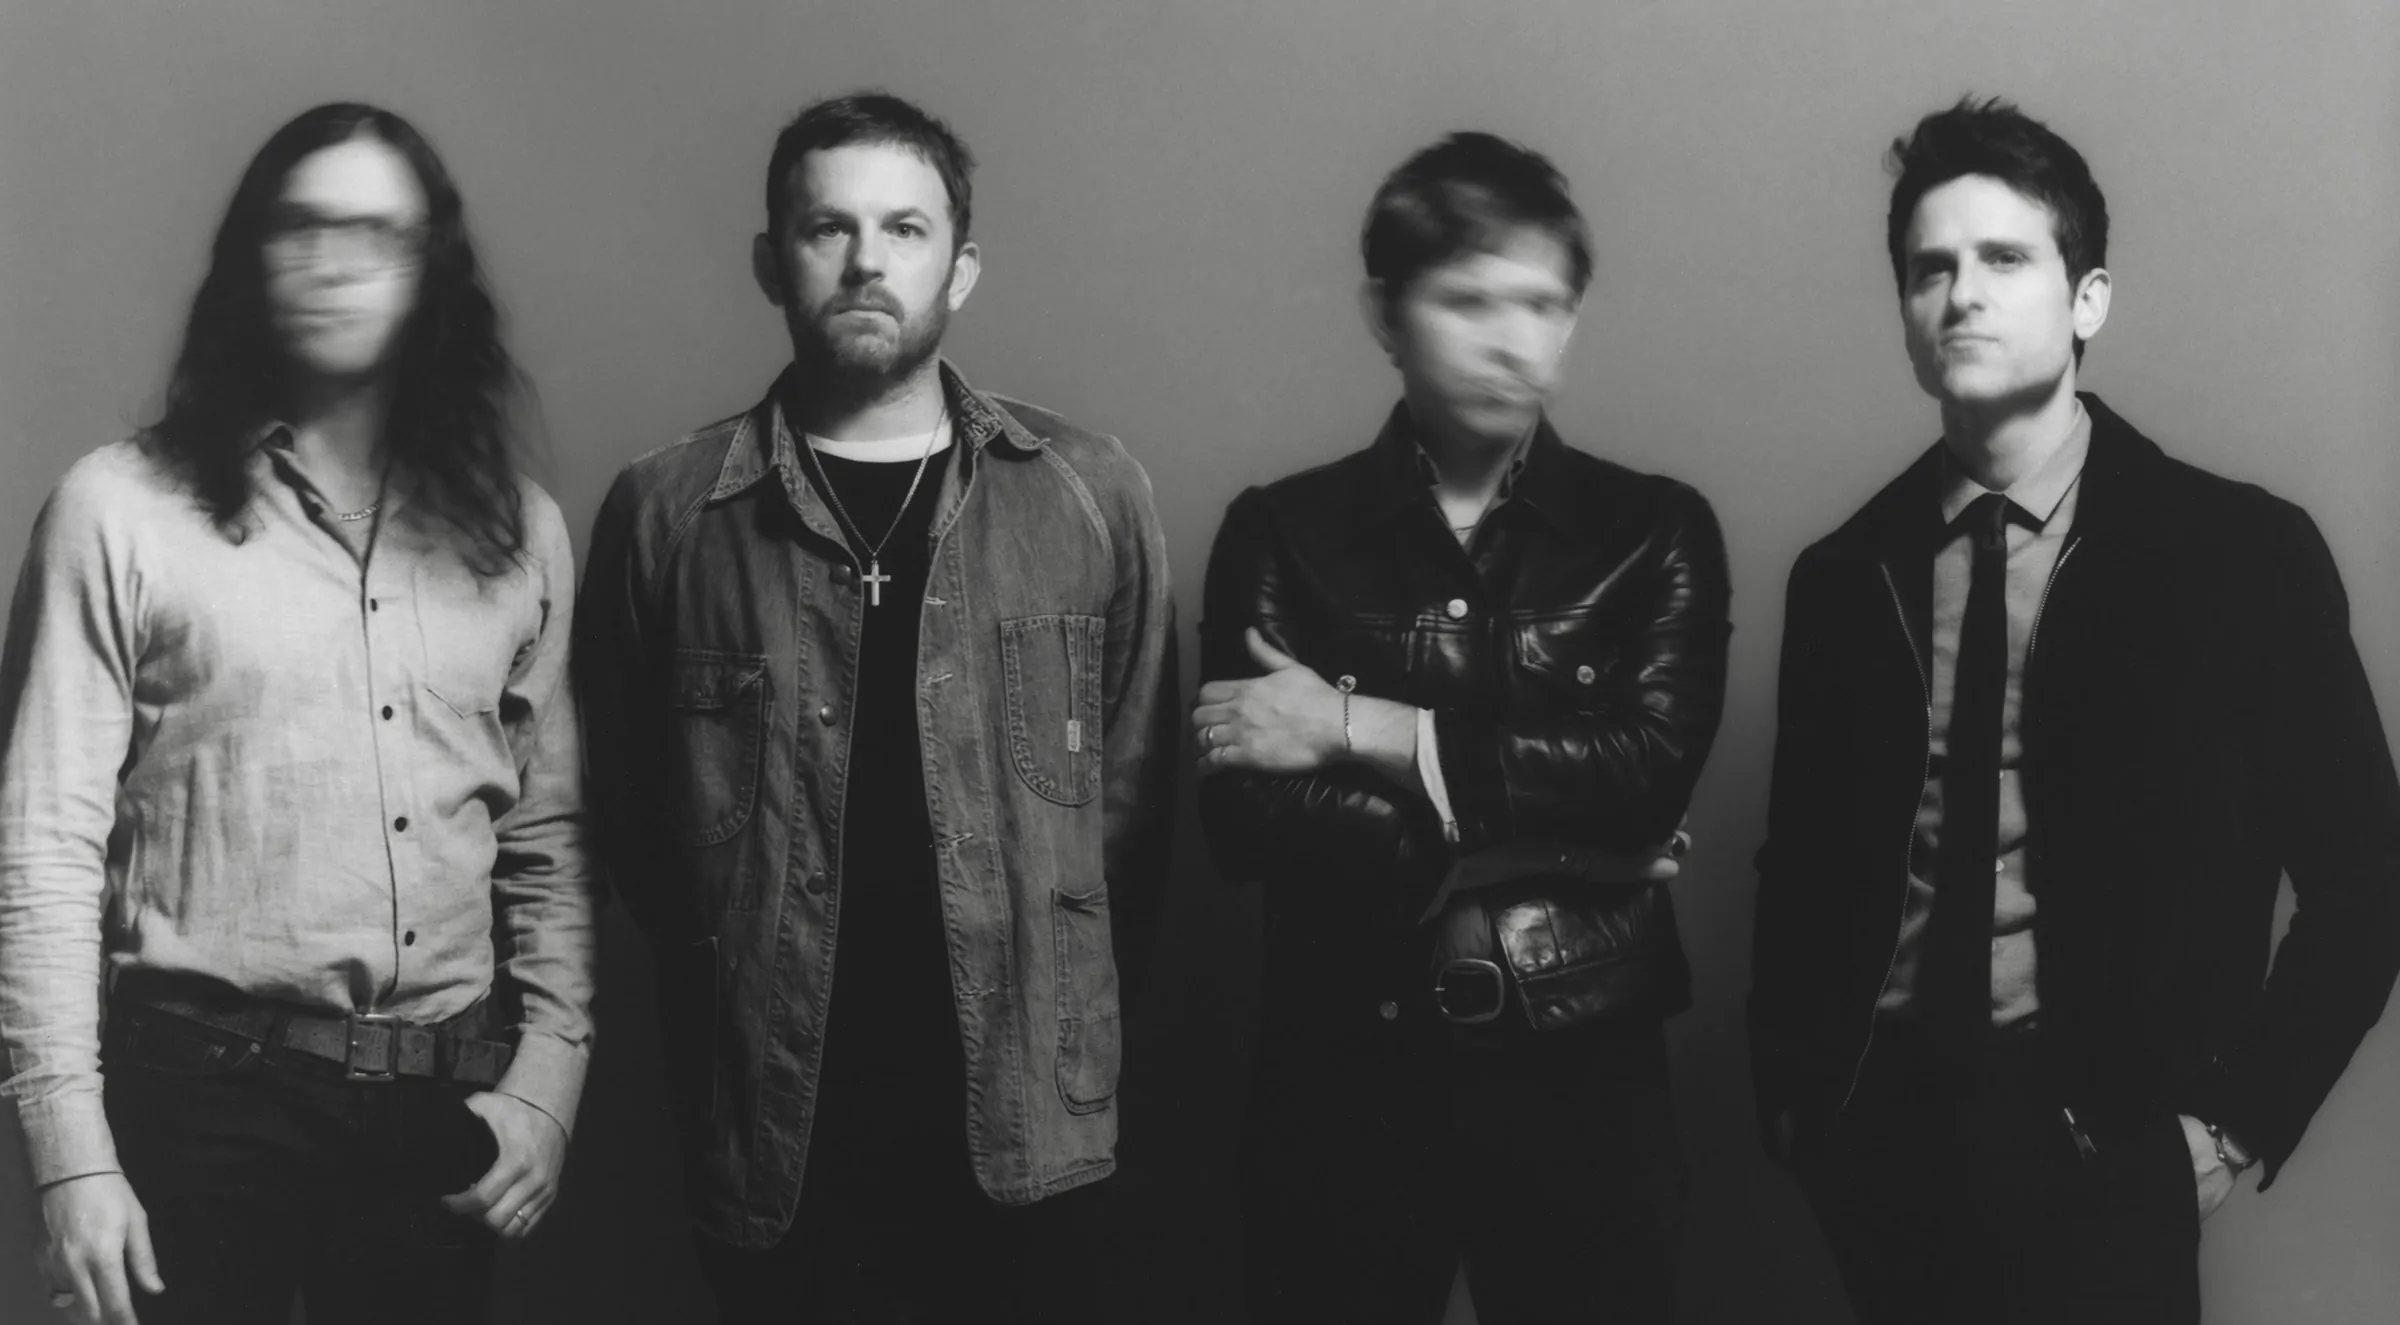 KINGS OF LEON announce eighth studio album ‘When You See Yourself’ – Out 5th March